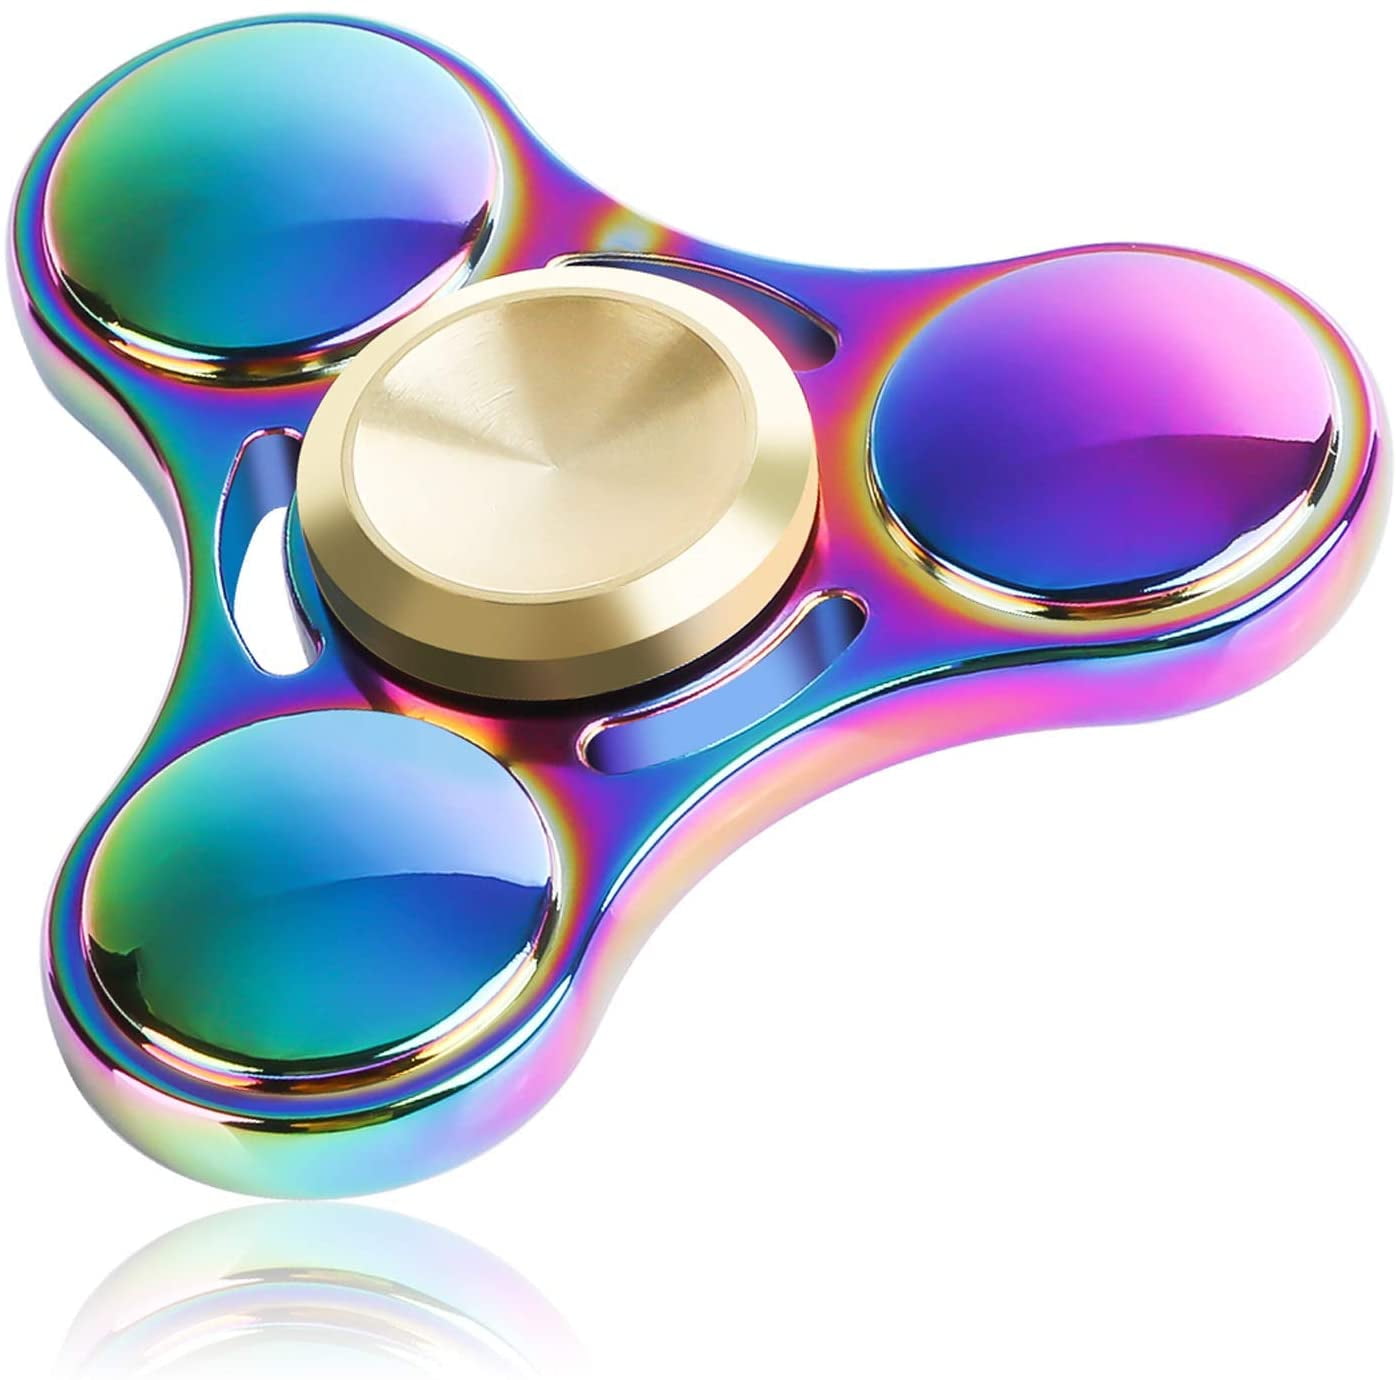 Fidget Finger Spinner Hand Spin Heavy Weight Focus Stress Toy UK High Quality 